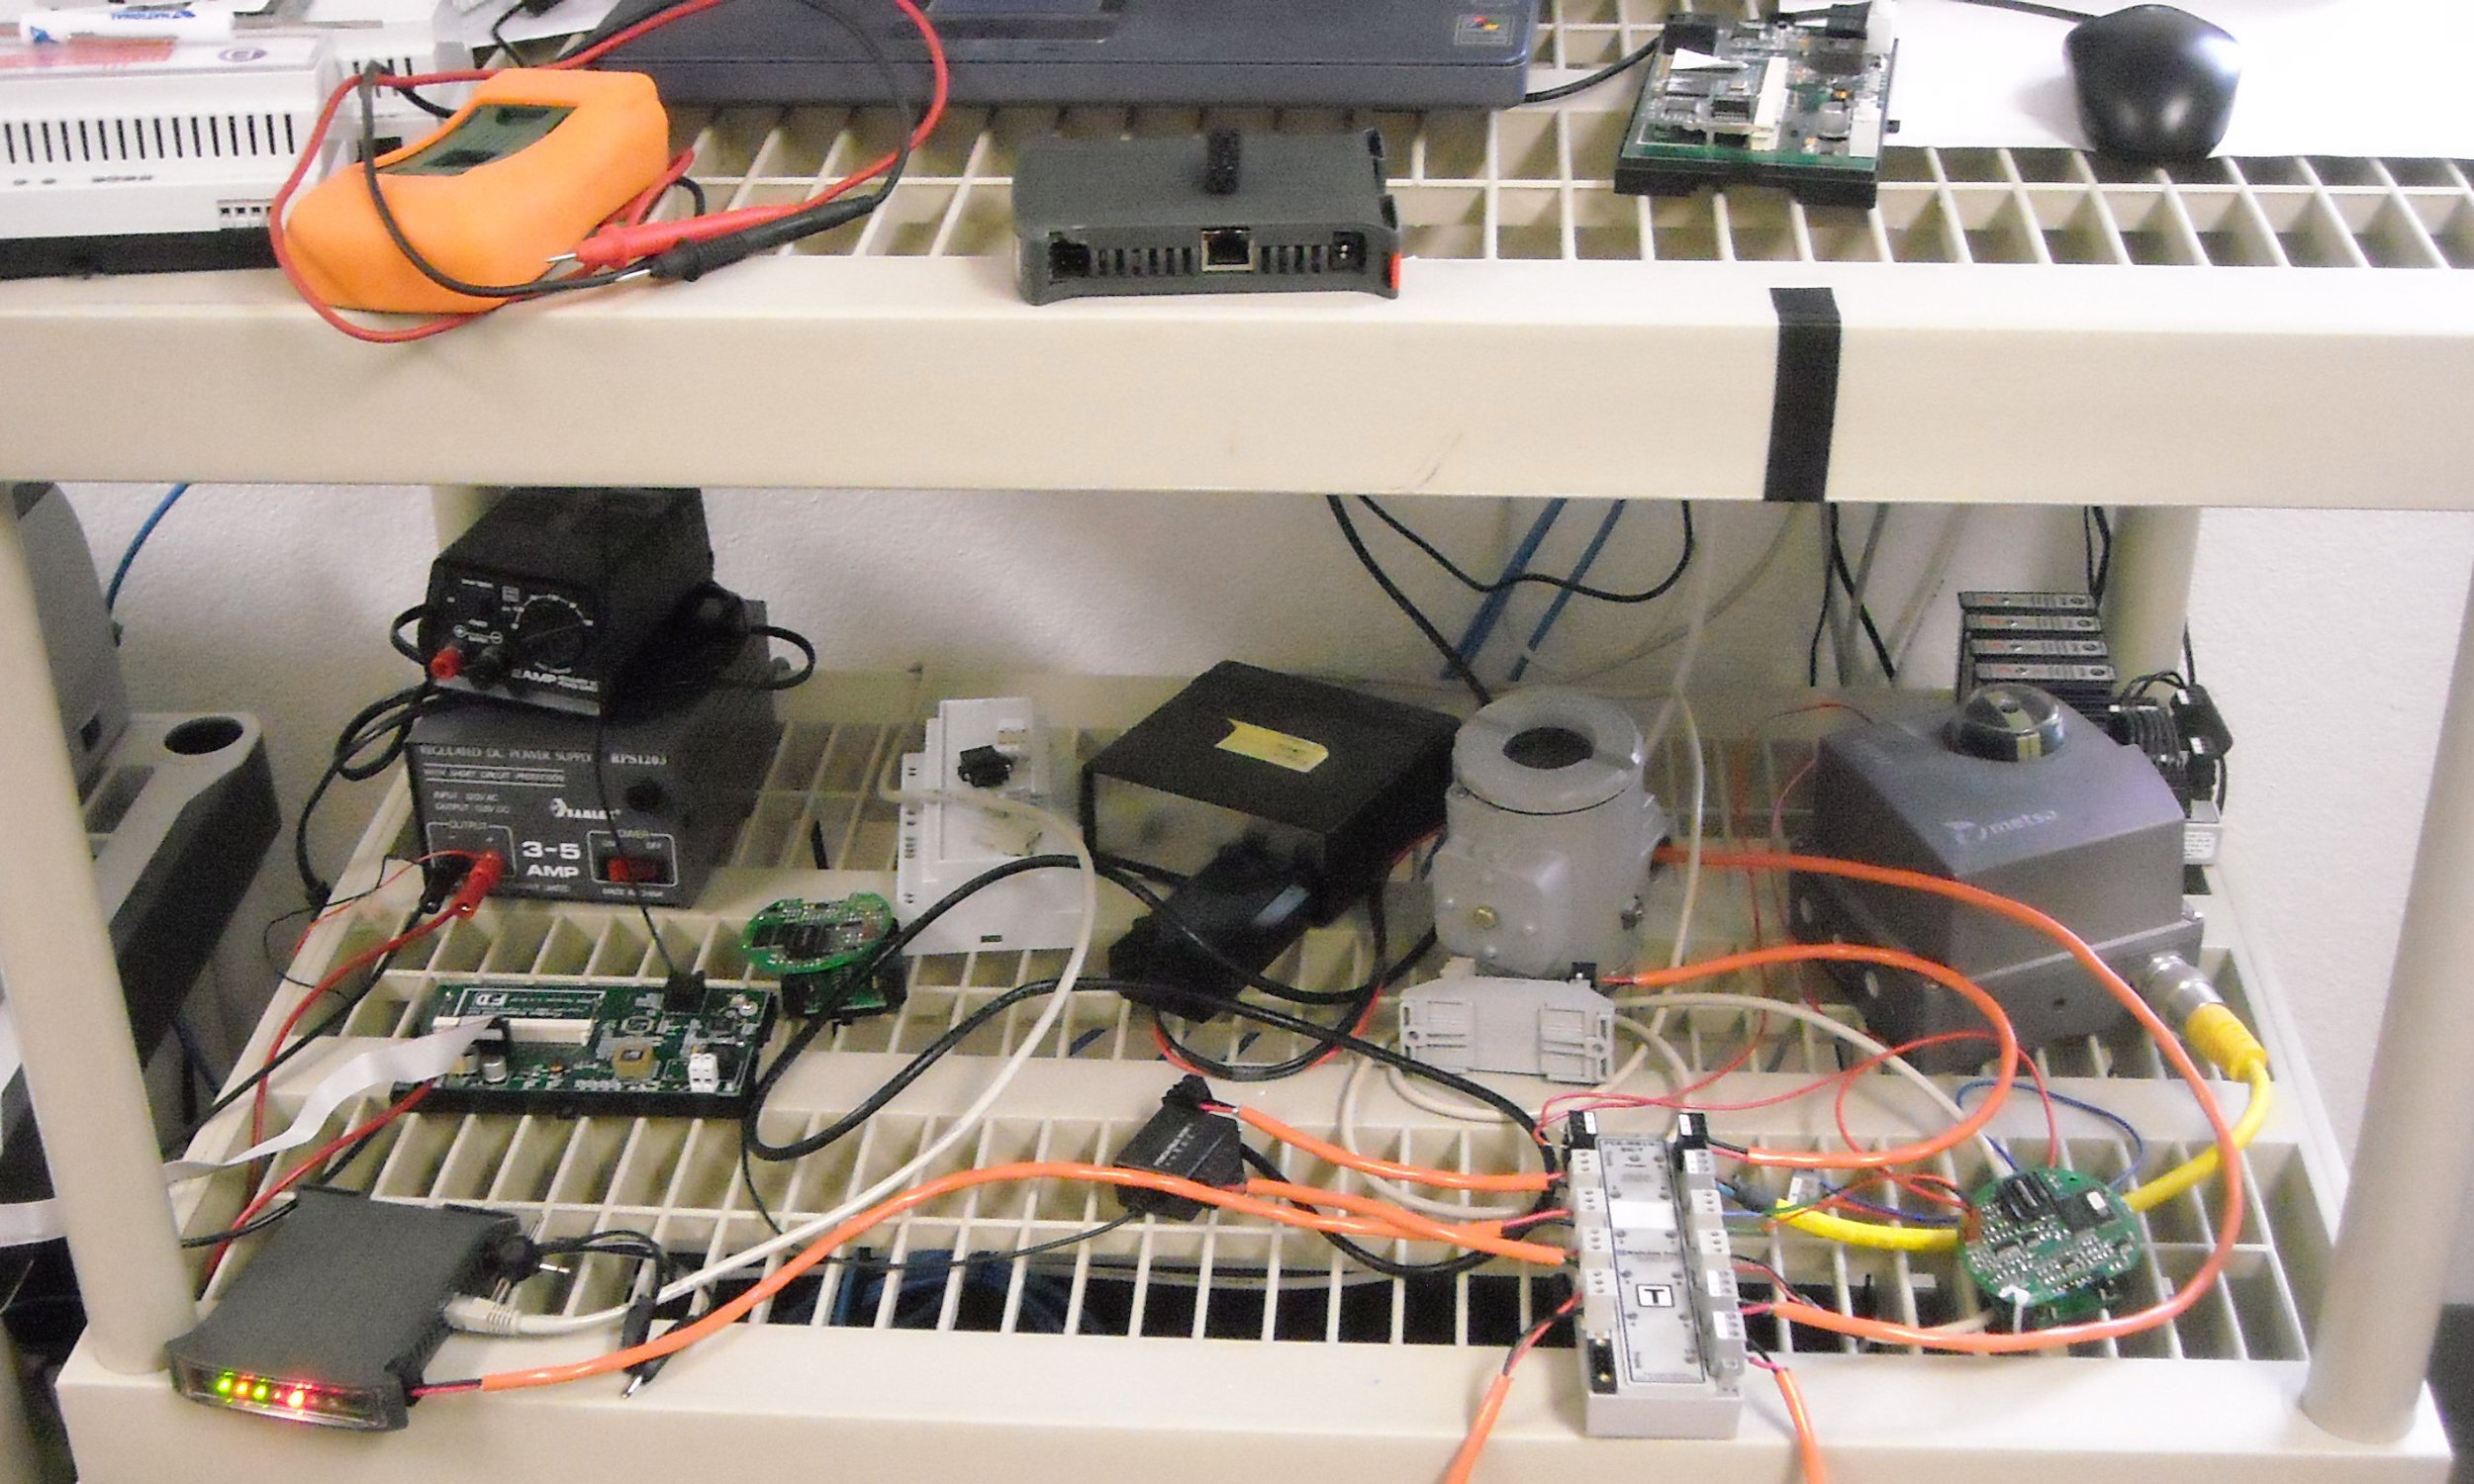  We put it all together in a Fieldbus network with a lot of different kinds of devices attached. 